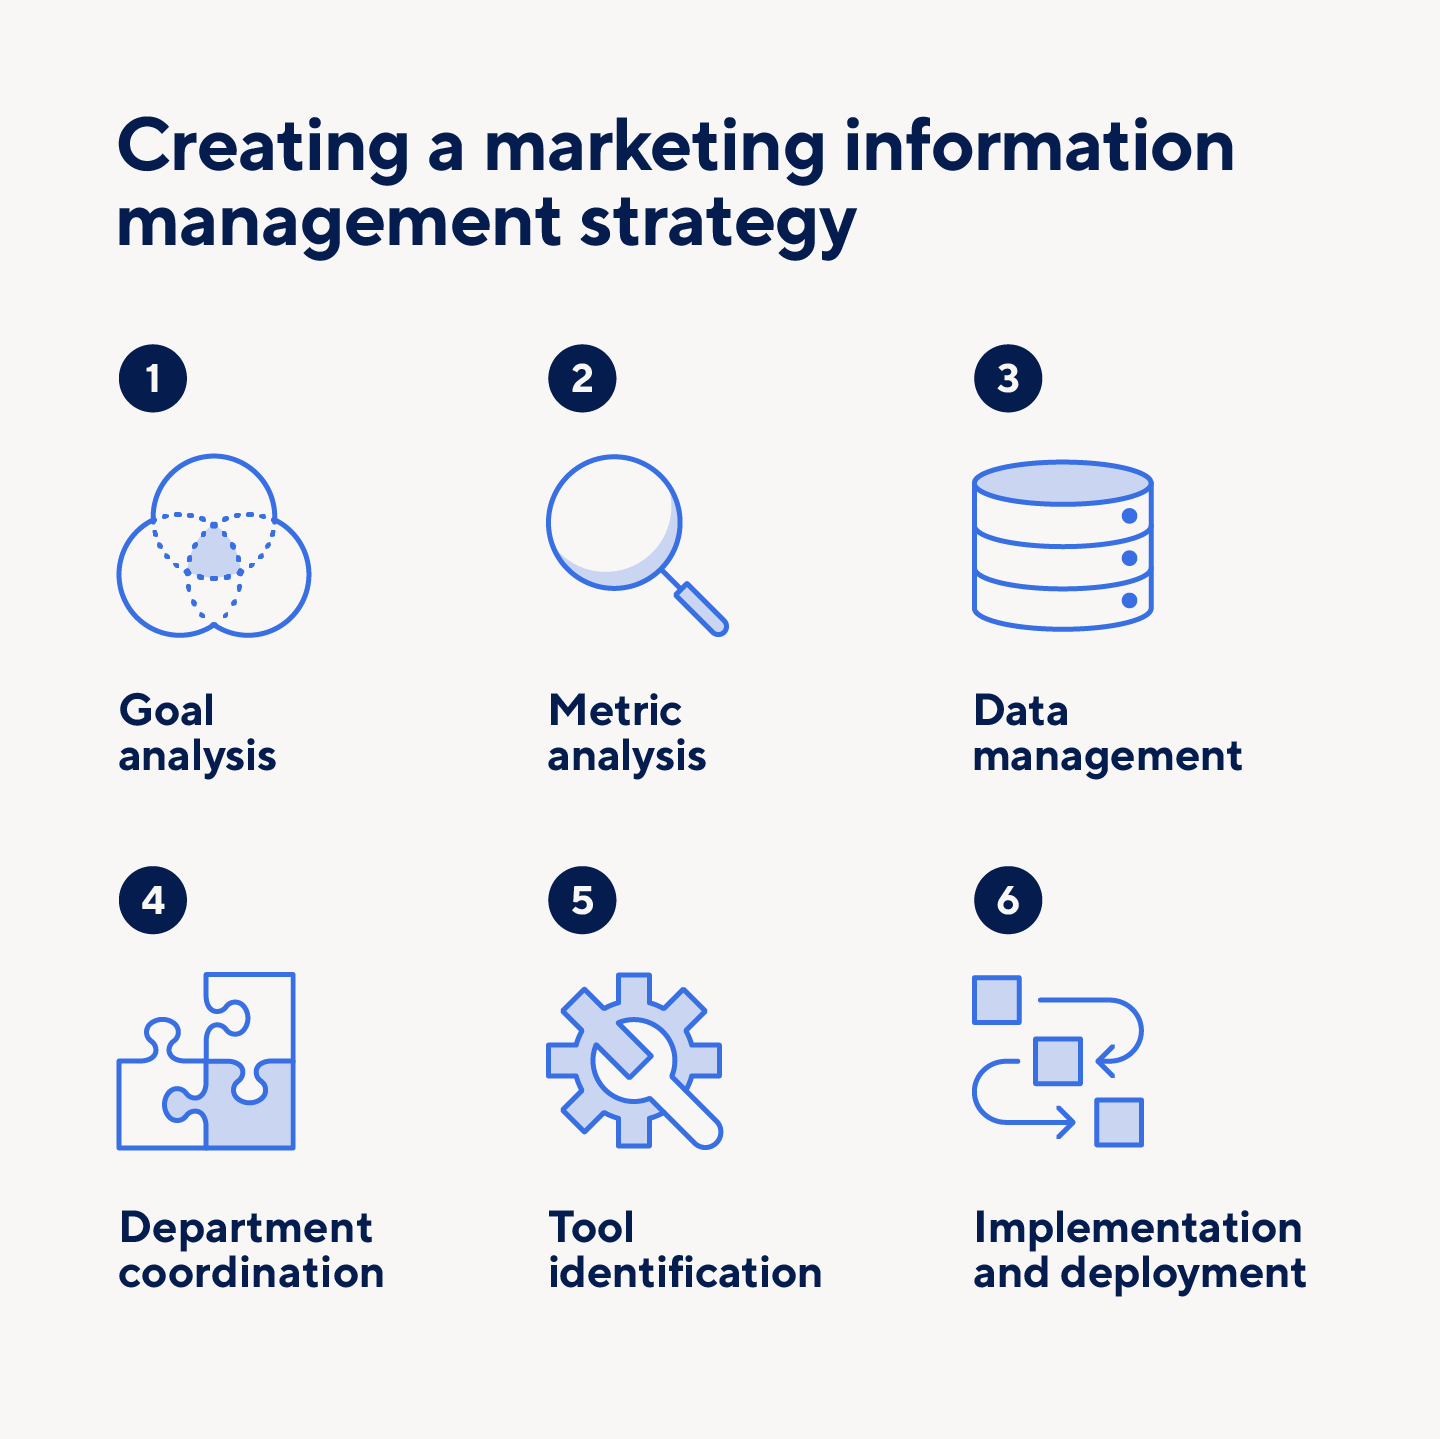 Steps on creating a marketing information management strategy, including goal analysis and data management